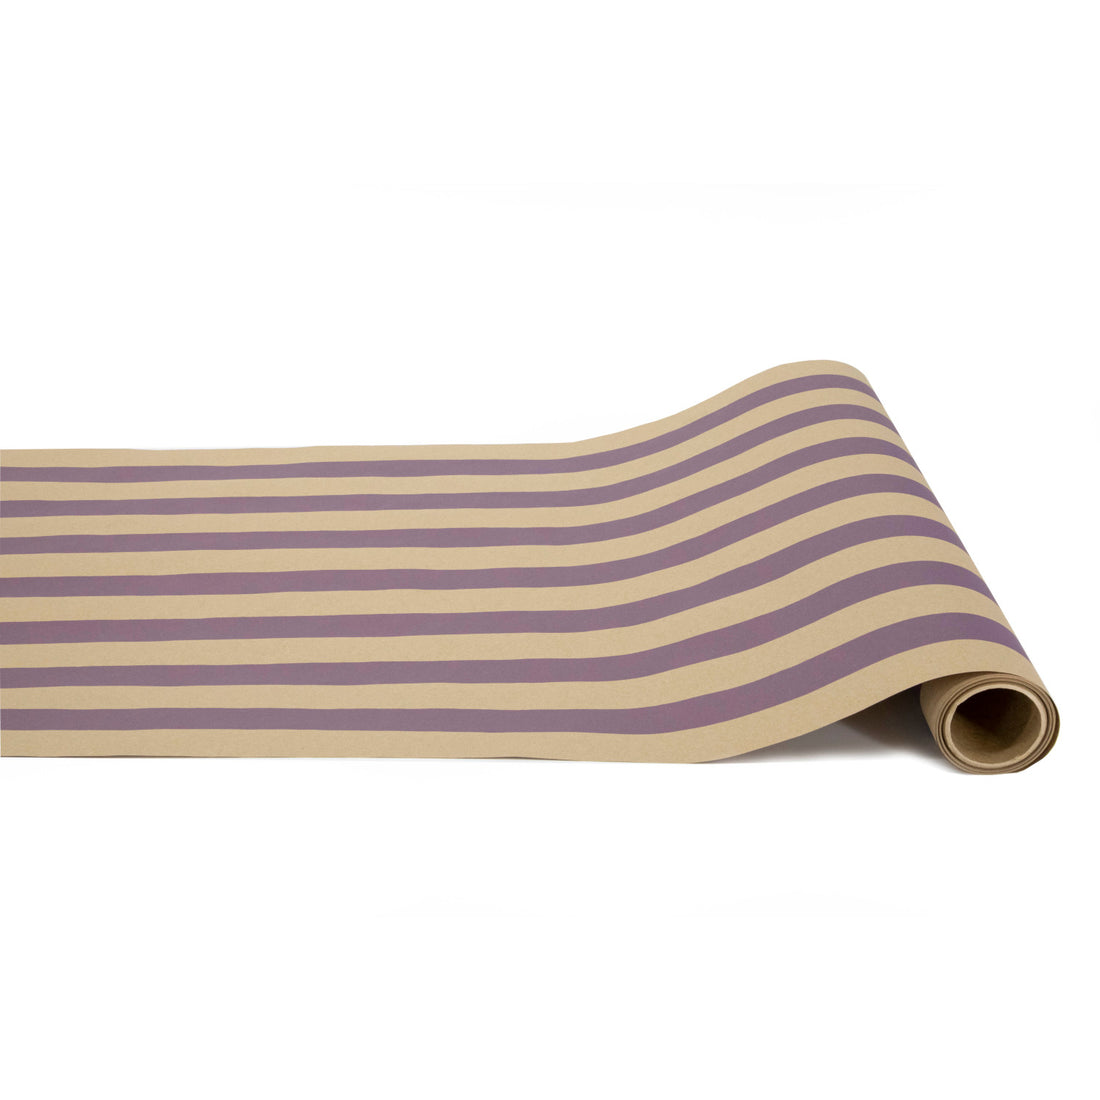 A paper roll with thick dark purple and kraft stripes running down the length.